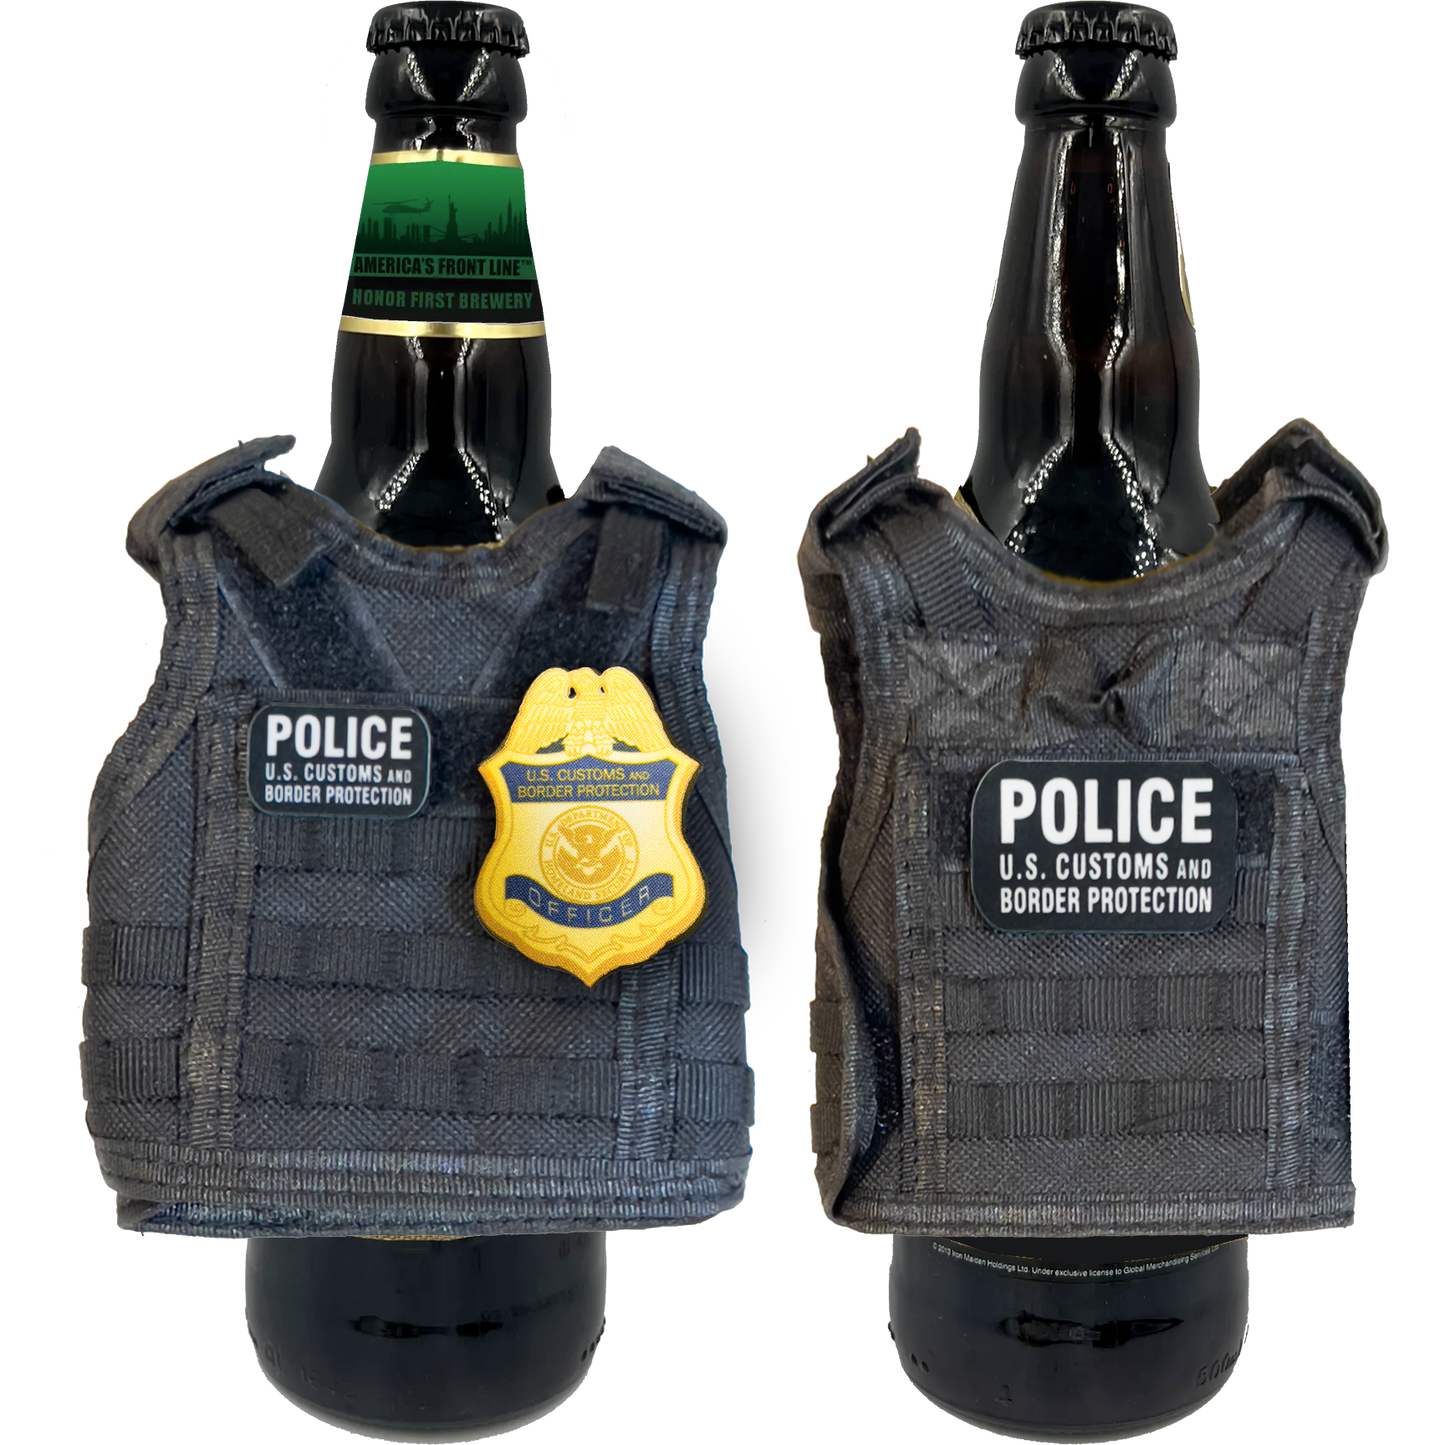 GB2-002 CBP Officer OFO Field Operations Tactical Beverage Bottle or Can Cooler Vest with removable patches perfect gift for Challenge Coin collectors